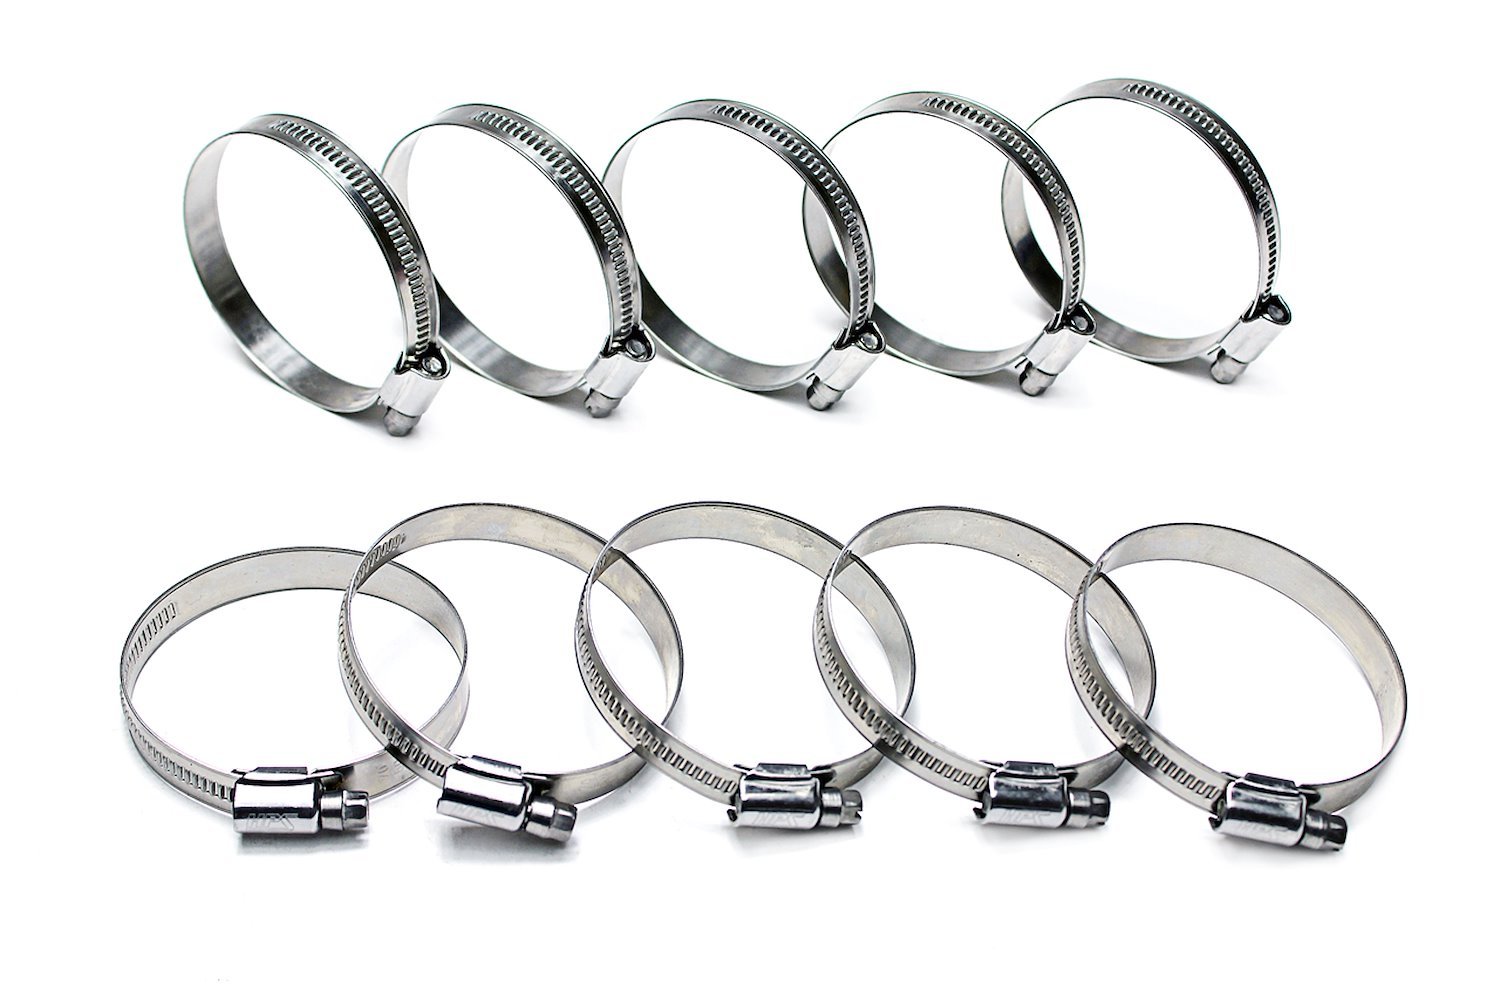 EMSC-50-70x10 Embossed Hose Clamp, Stainless Steel Embossed Hose Clamp, Size #40, Effective Range: 2 in.- 3 in., 10Pc